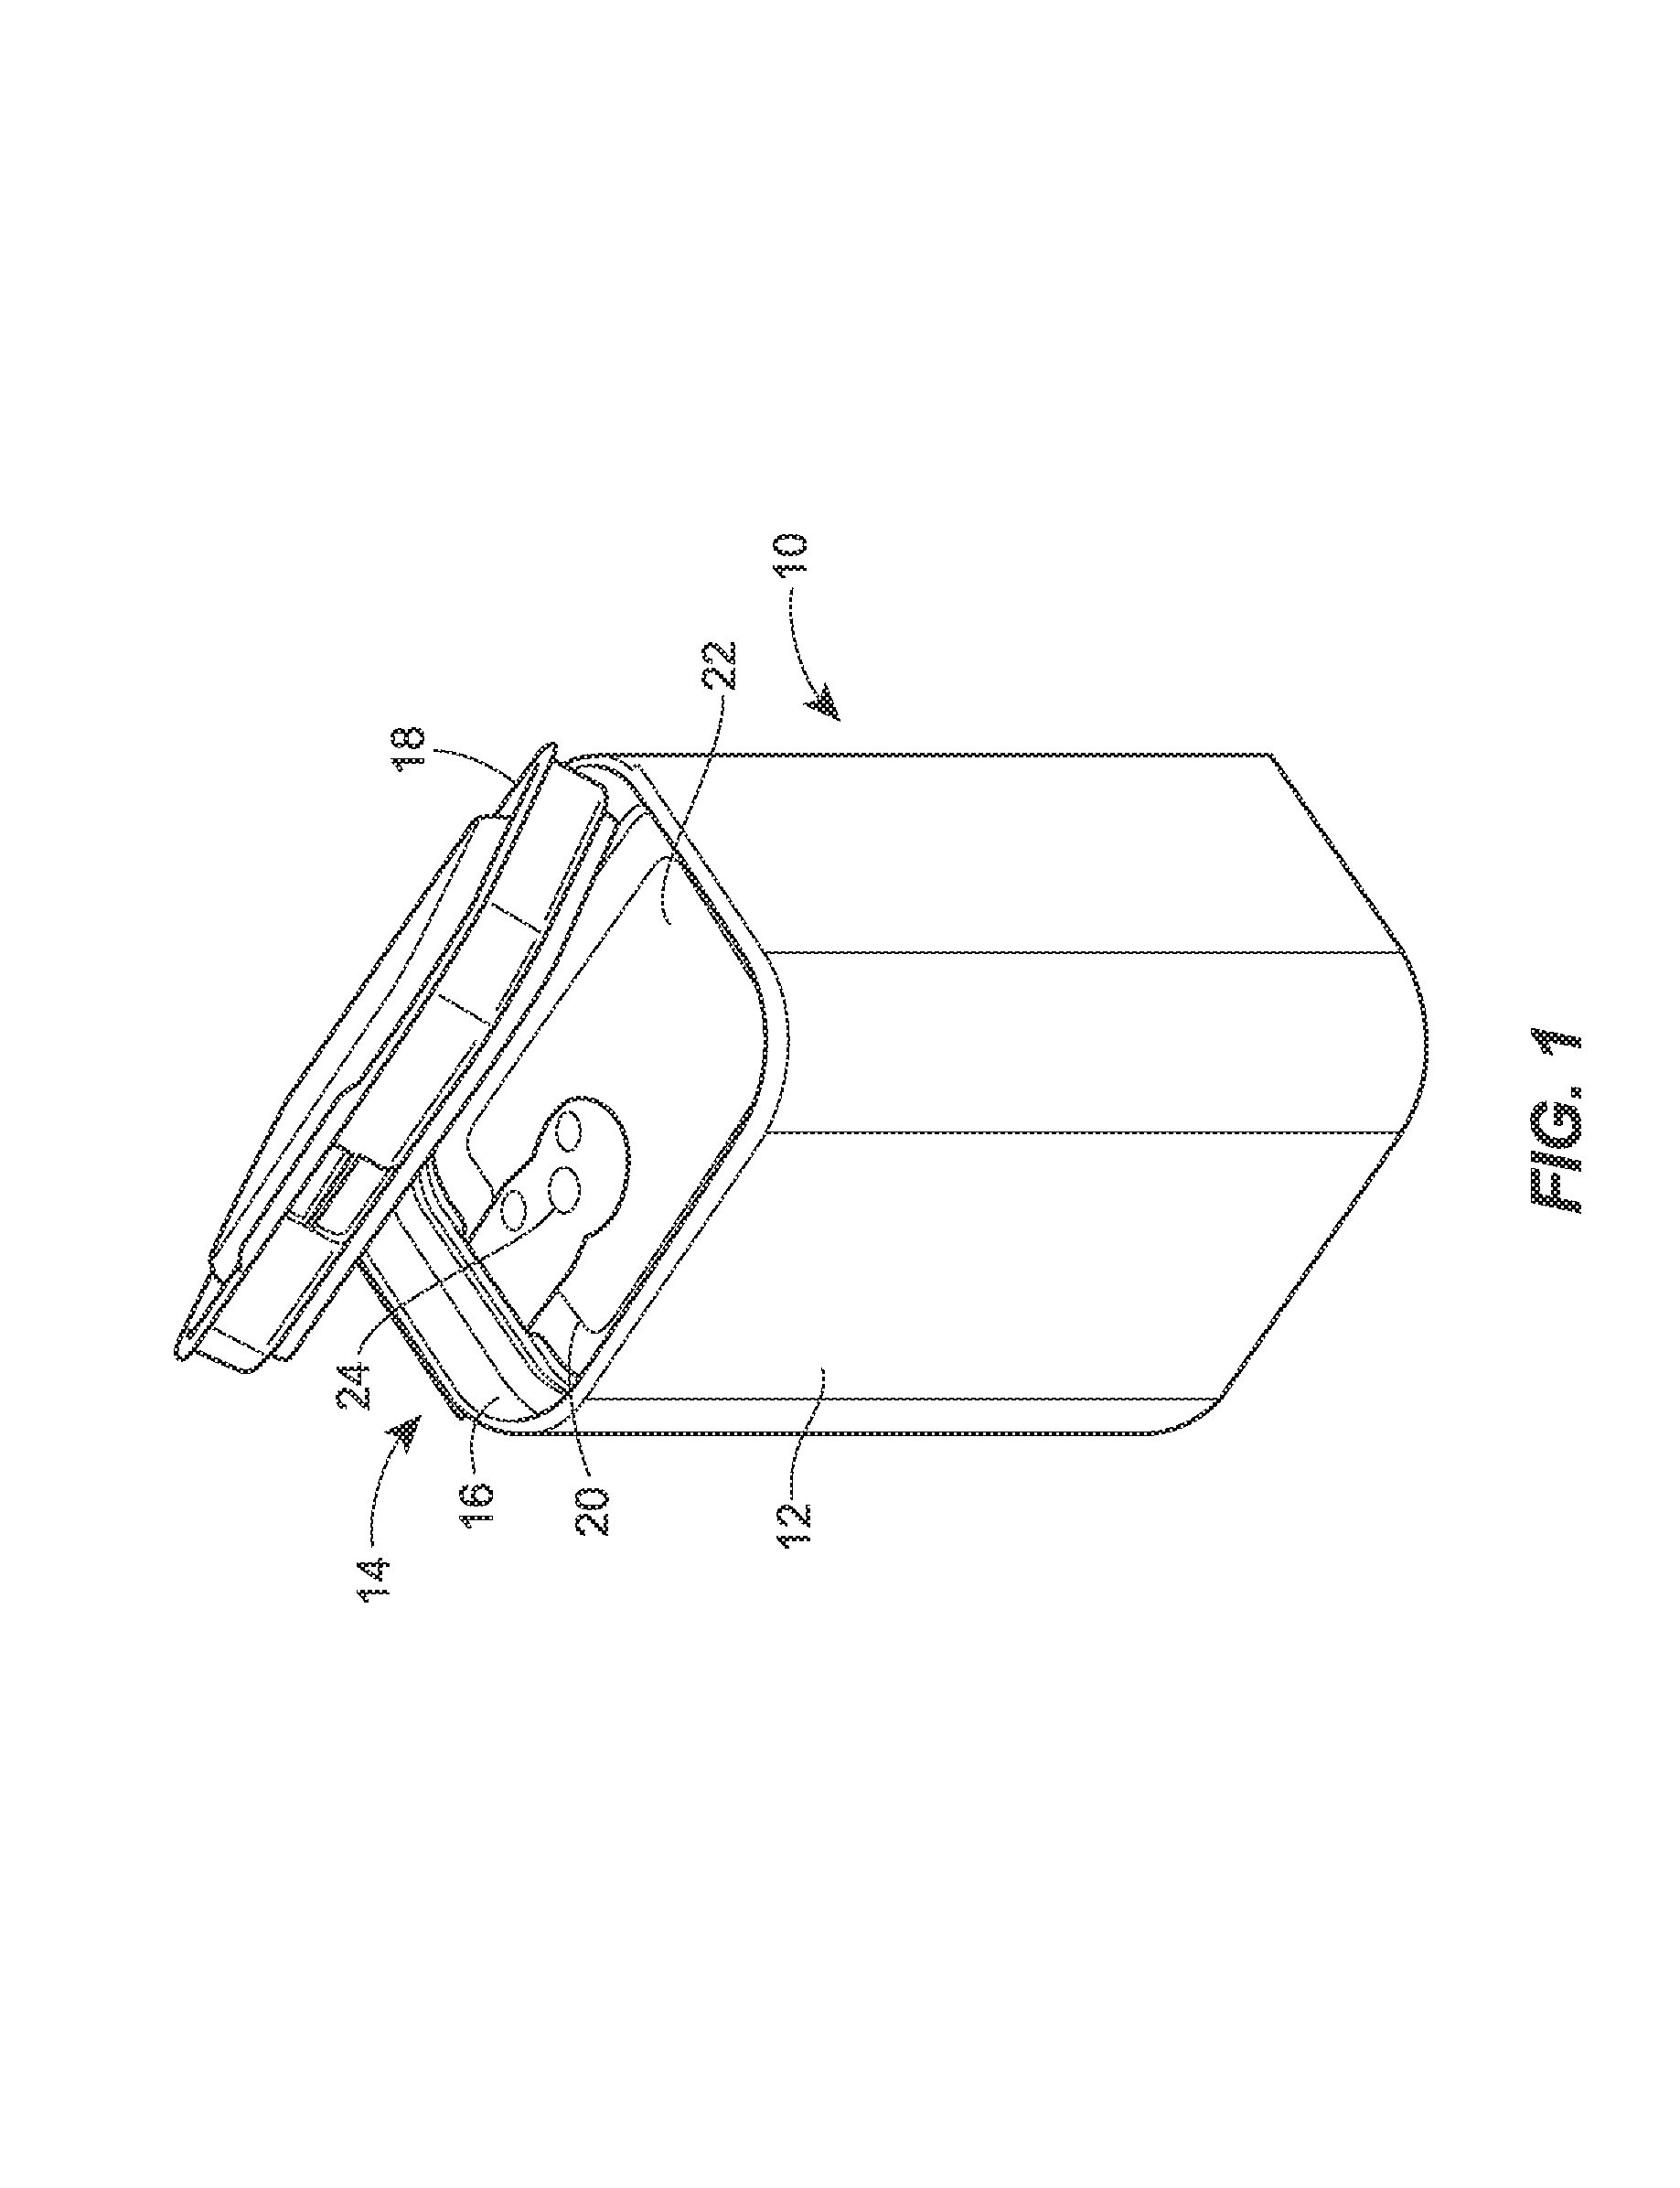 Flexible, stackable container and method and system for manufacturing same